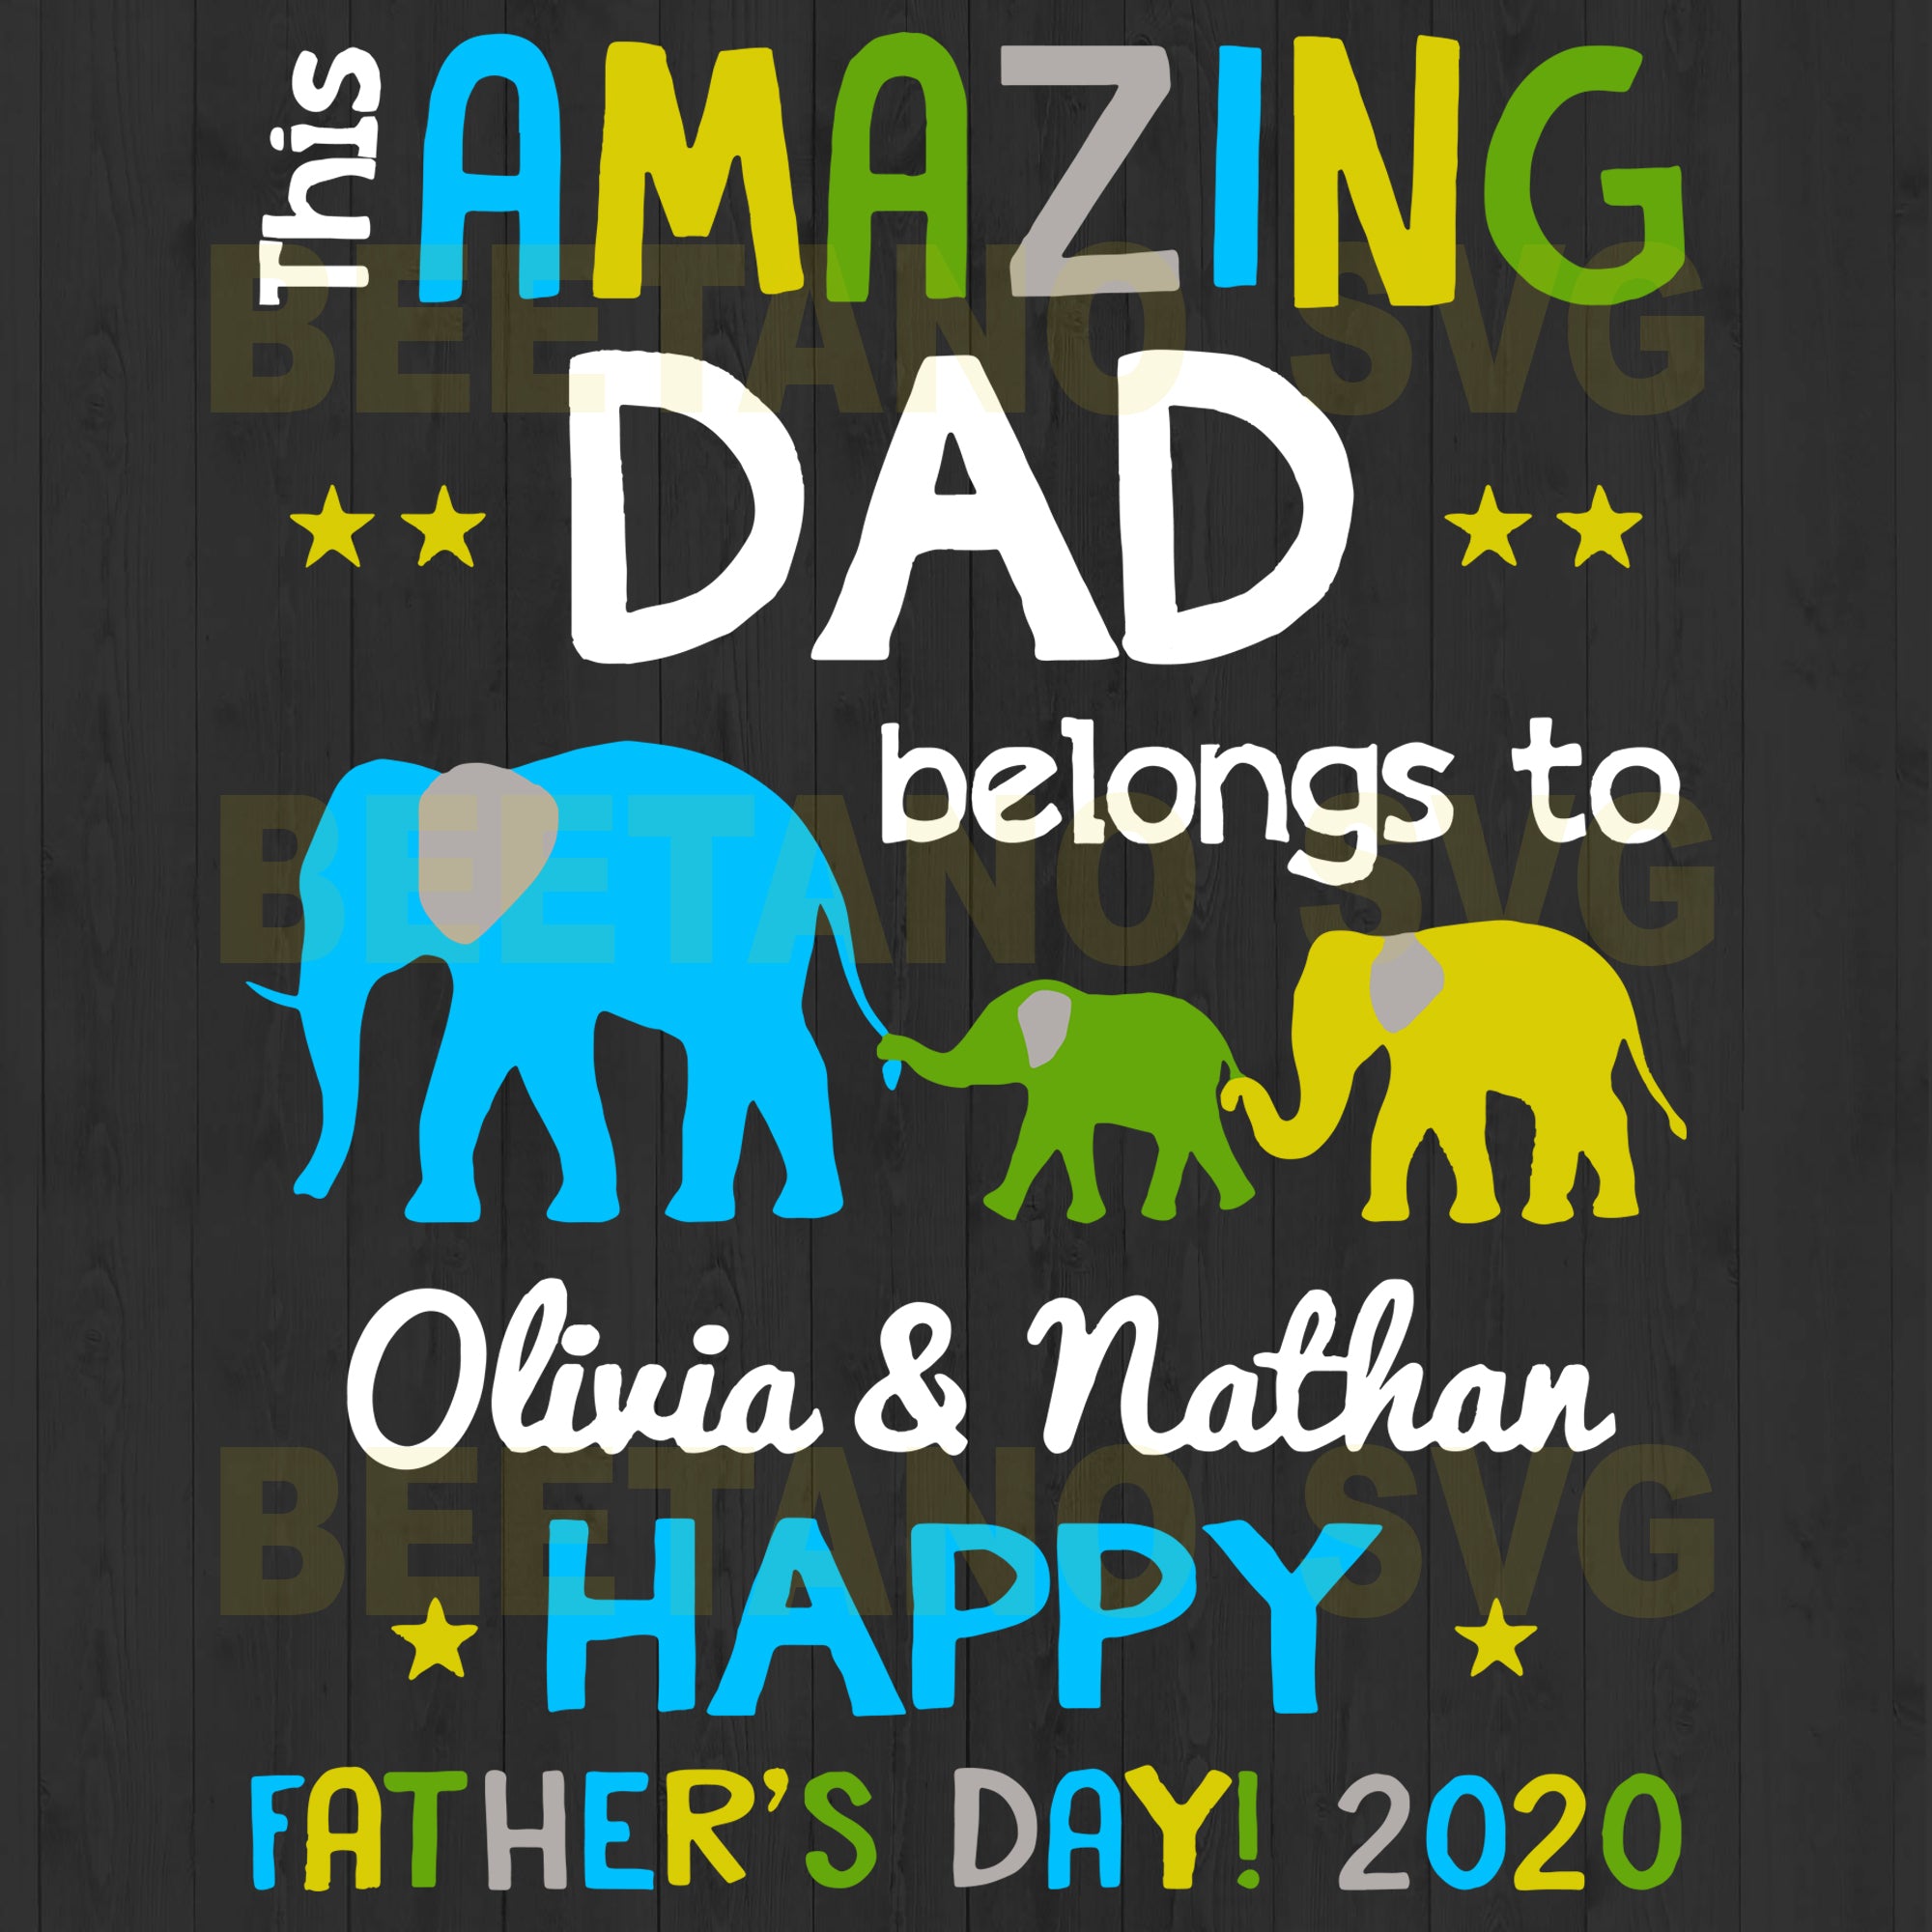 Download This Amazing Dad Belongs To Happy Father's Day Svg Files ...